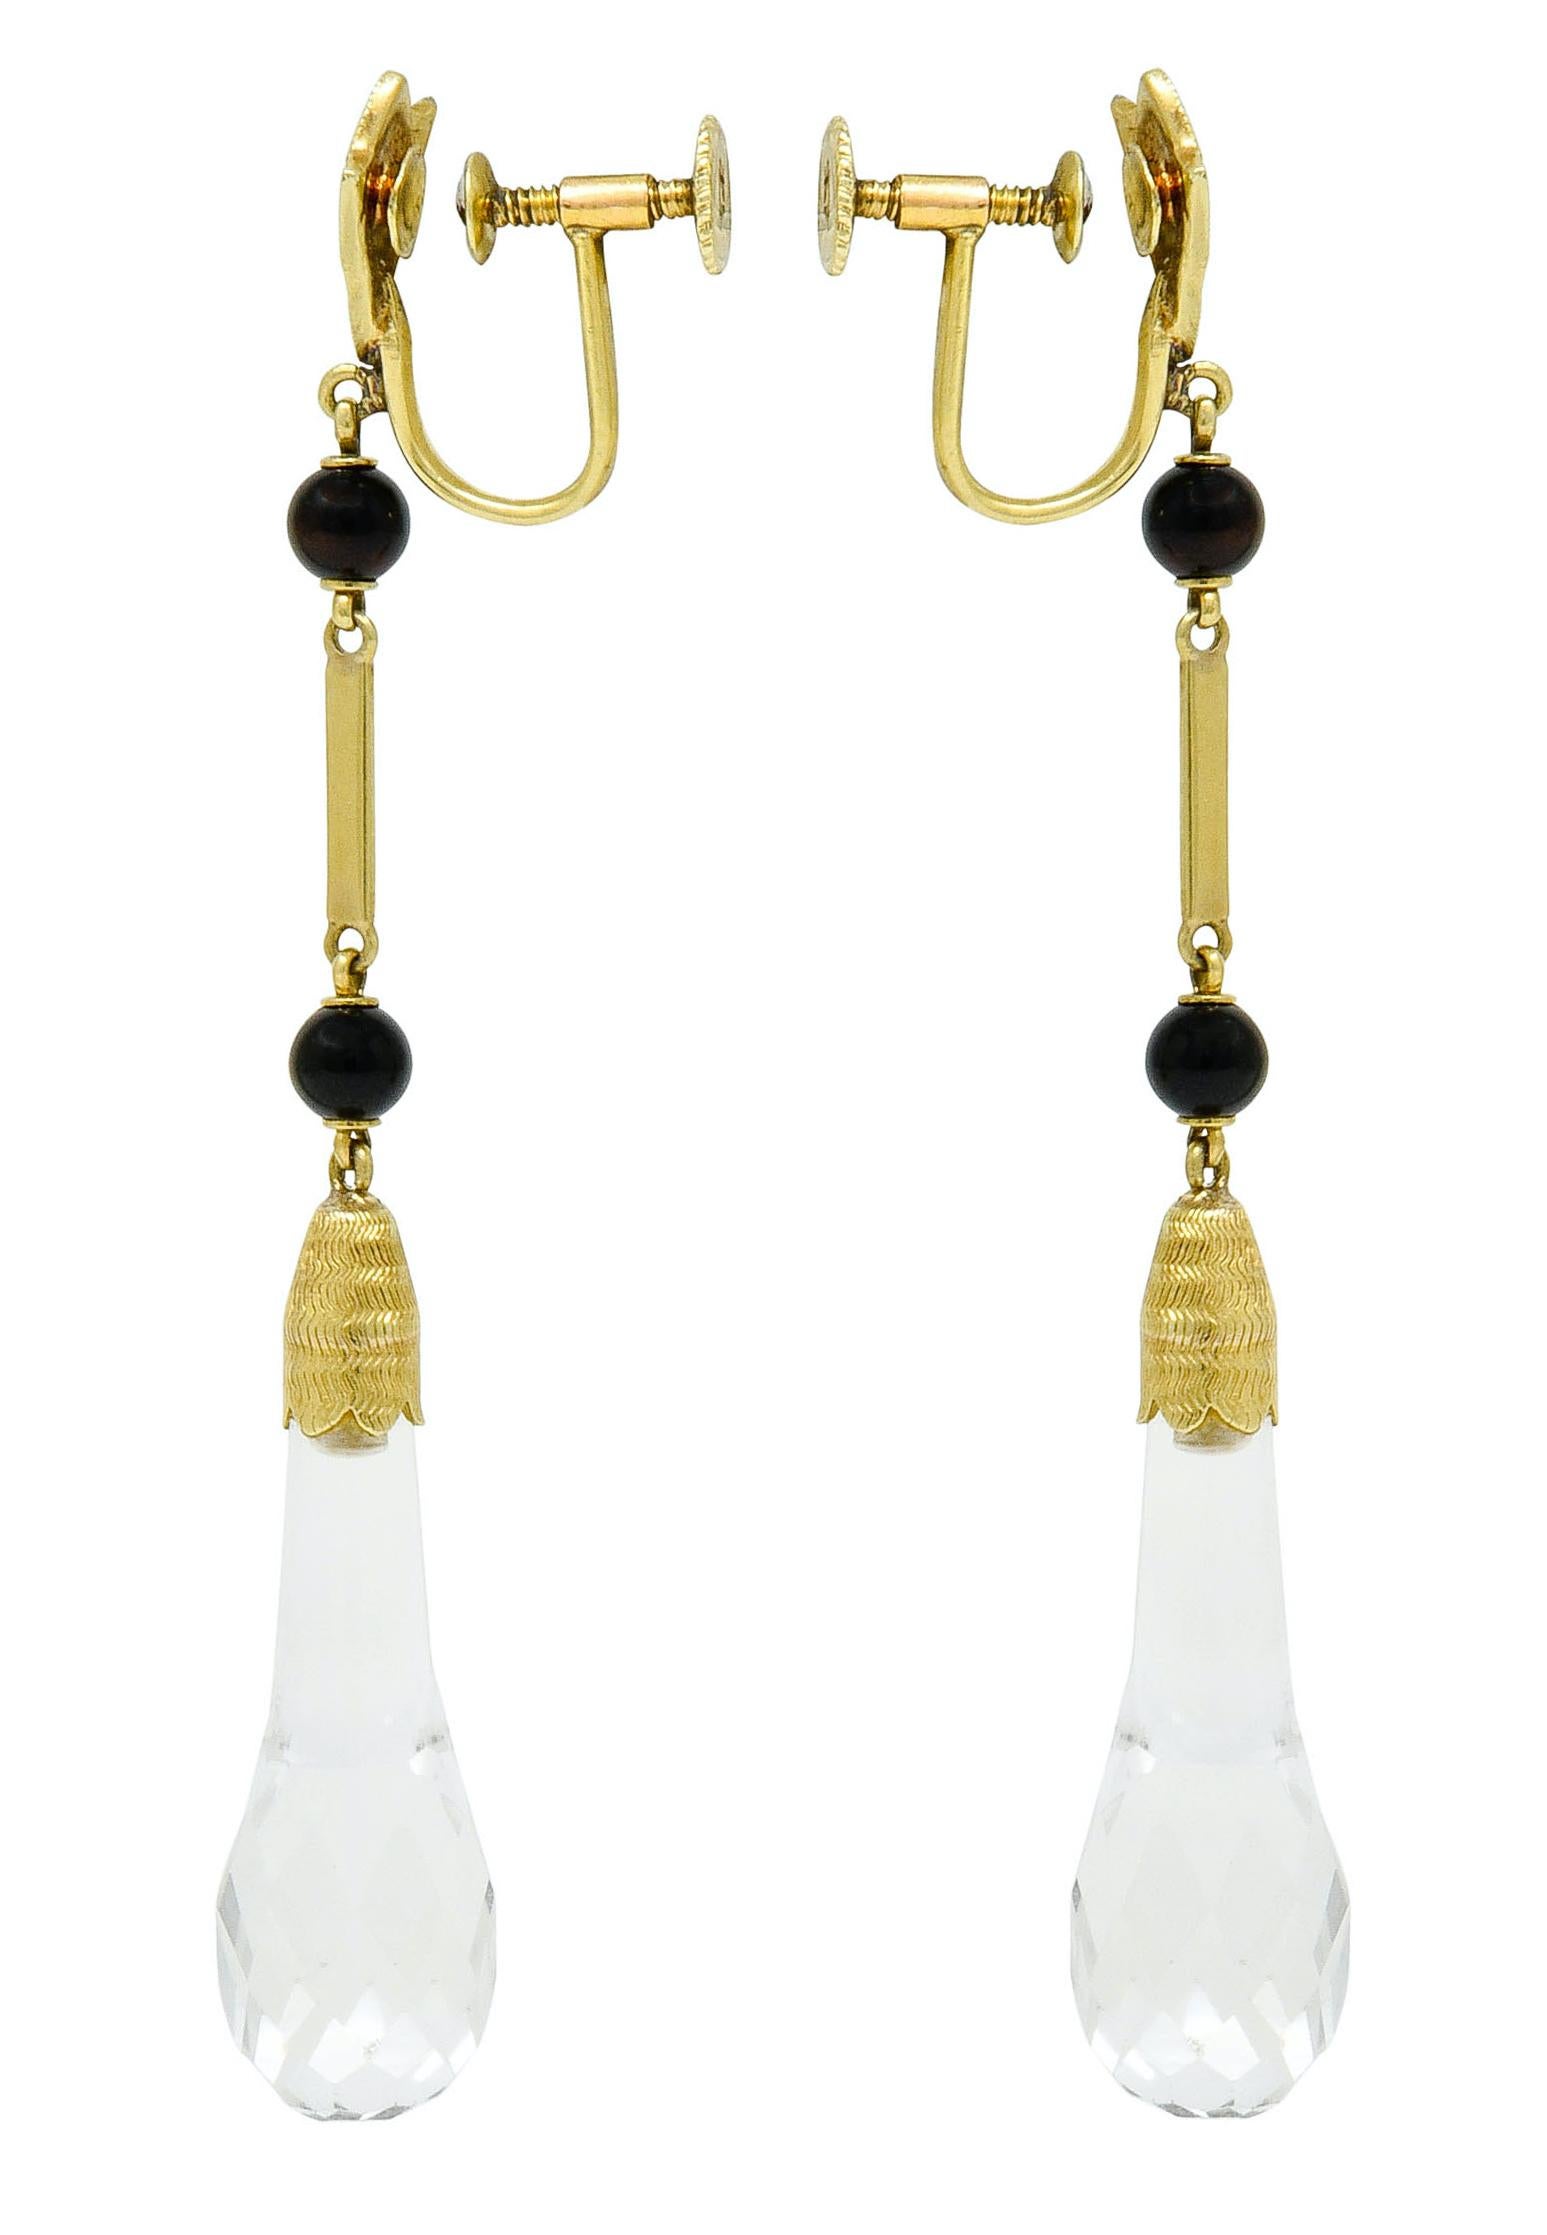 Drop earrings with a milgrain foliate surmount suspending two 4.1 mm onyx beads that center a polished gold bar

Terminating as a rock crystal drop with a faceted briolette base and scalloped gold cap featuring a deeply ridged texture

Completed by